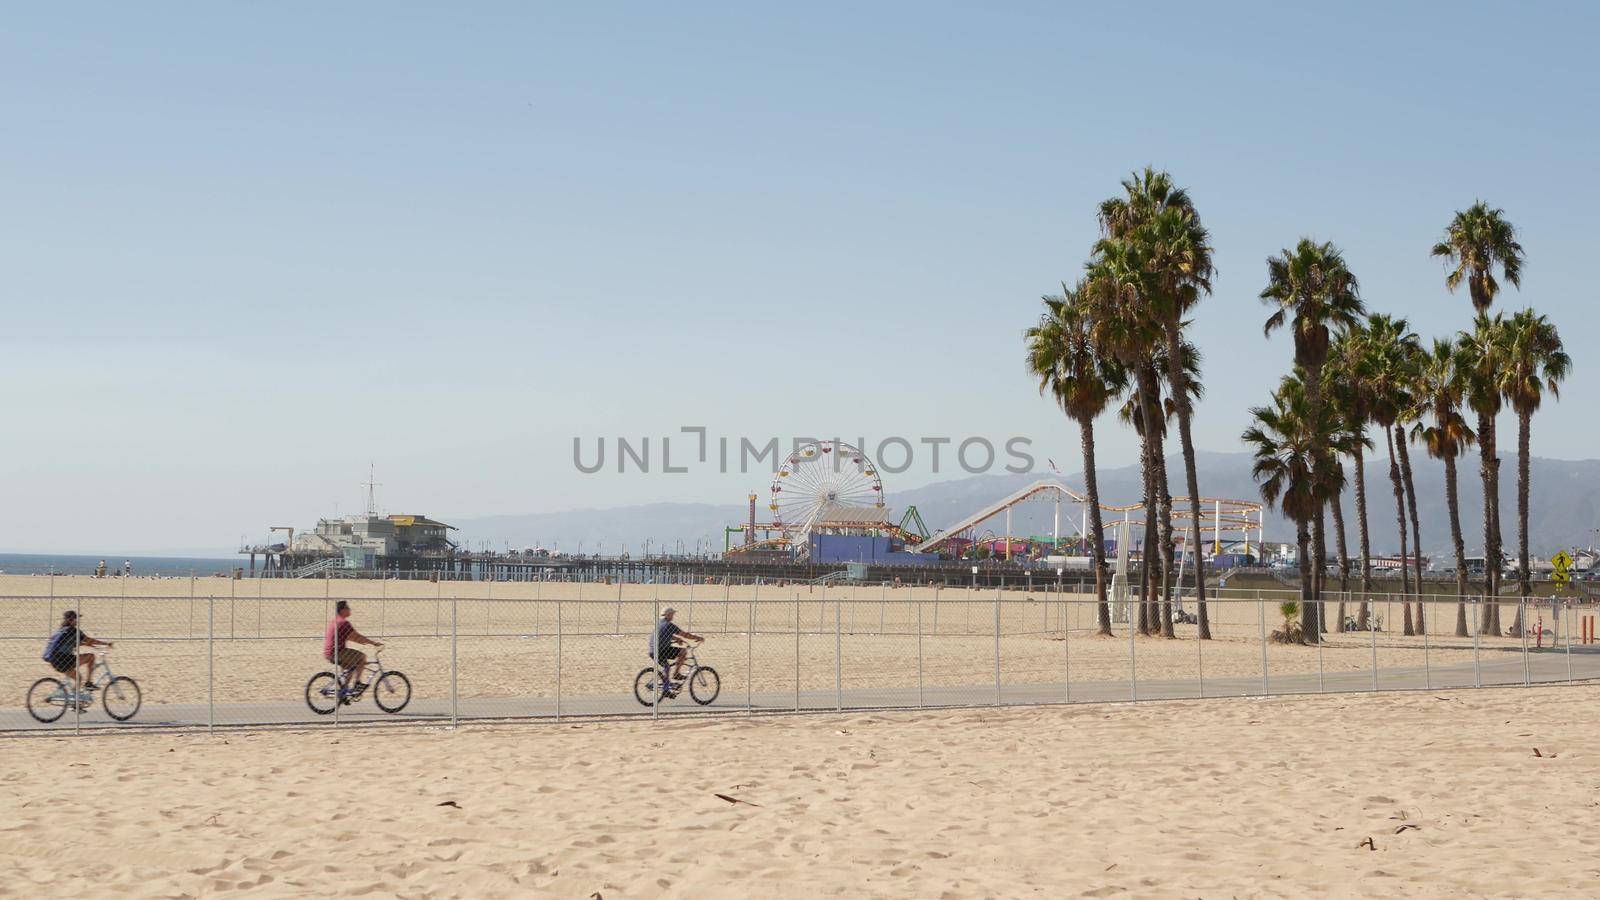 SANTA MONICA, LOS ANGELES CA USA - 28 OCT 2019: California summertime beach aesthetic, people walking and ride cycles on bicycle path. Amusement park on pier and palms. American pacific ocean resort by DogoraSun